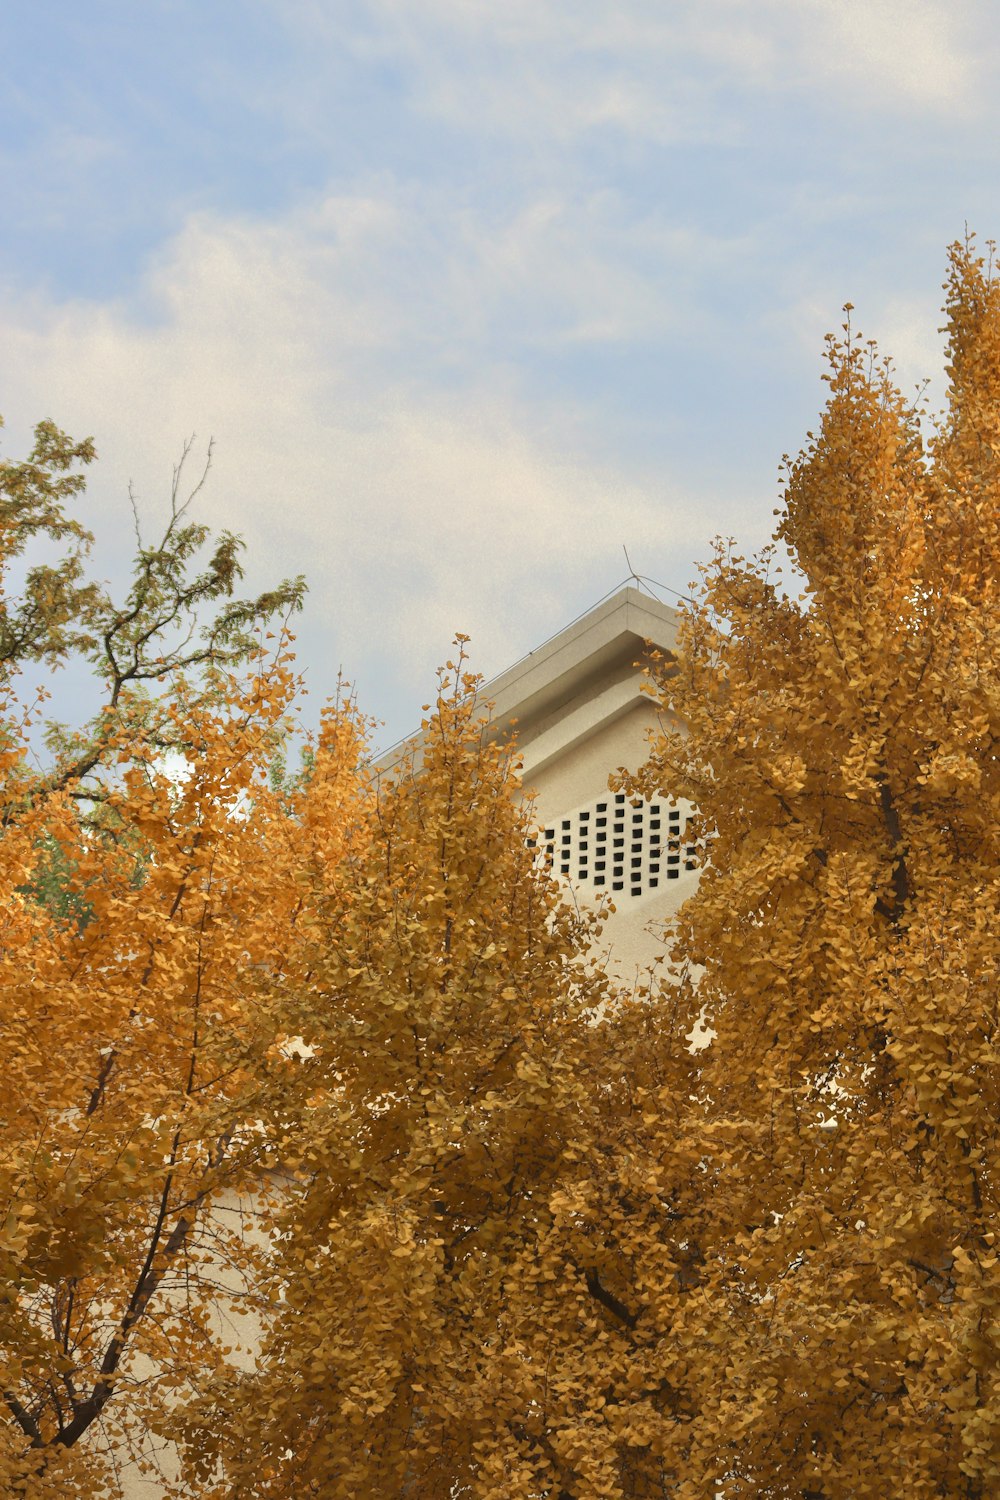 a clock tower is surrounded by trees with yellow leaves